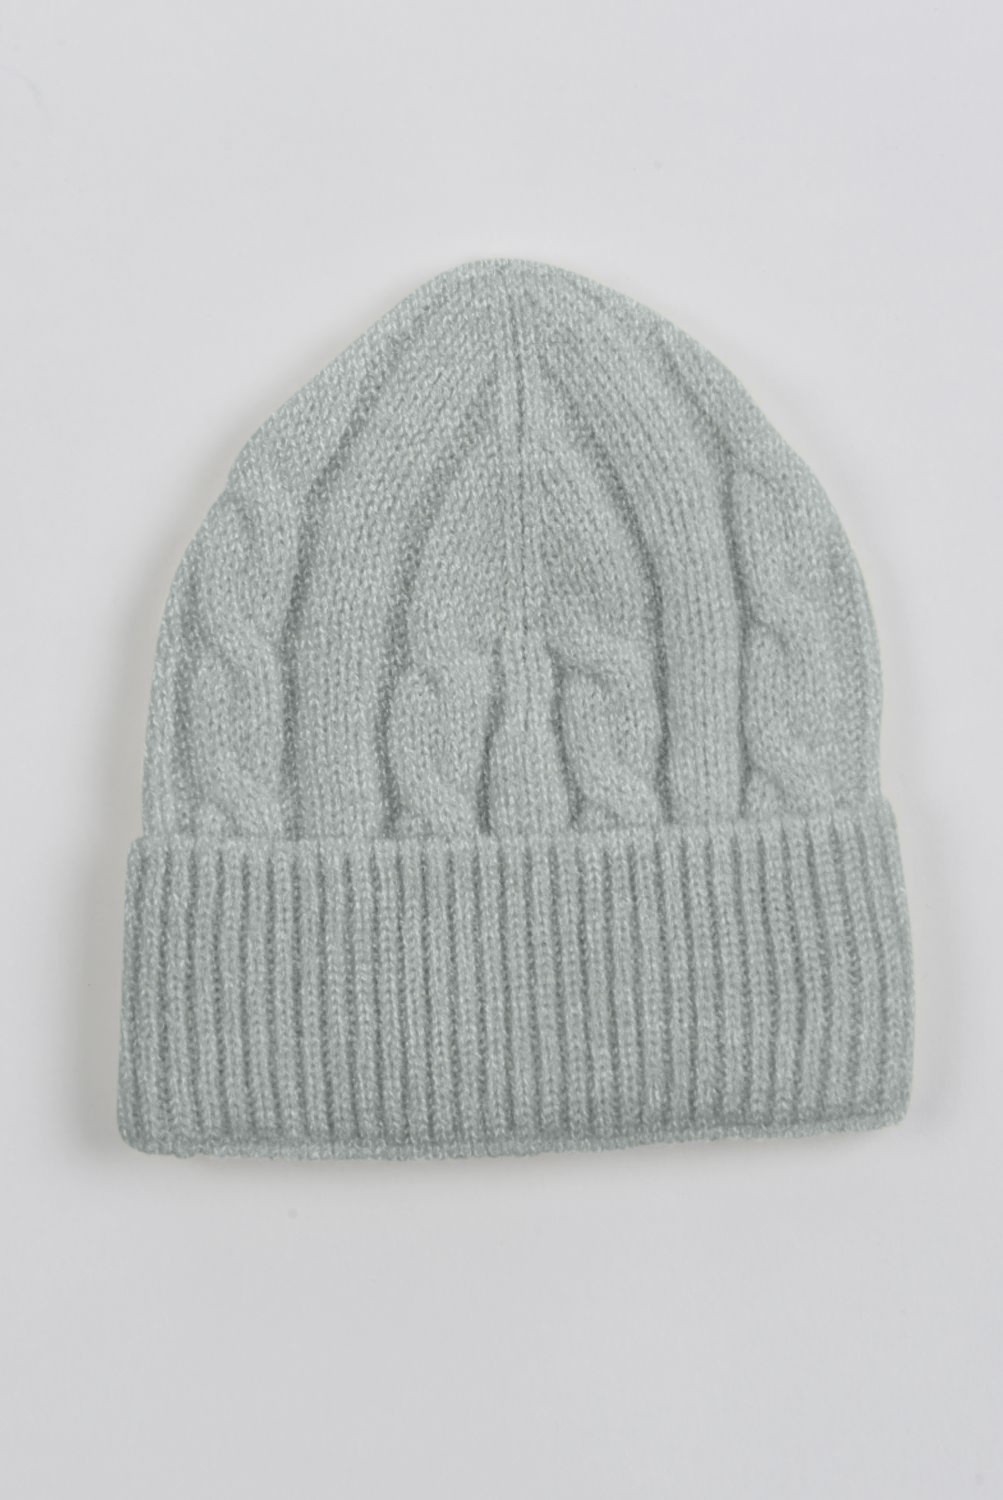 Baby cashmere beanie hat light grey | Italy in Cashmere UK